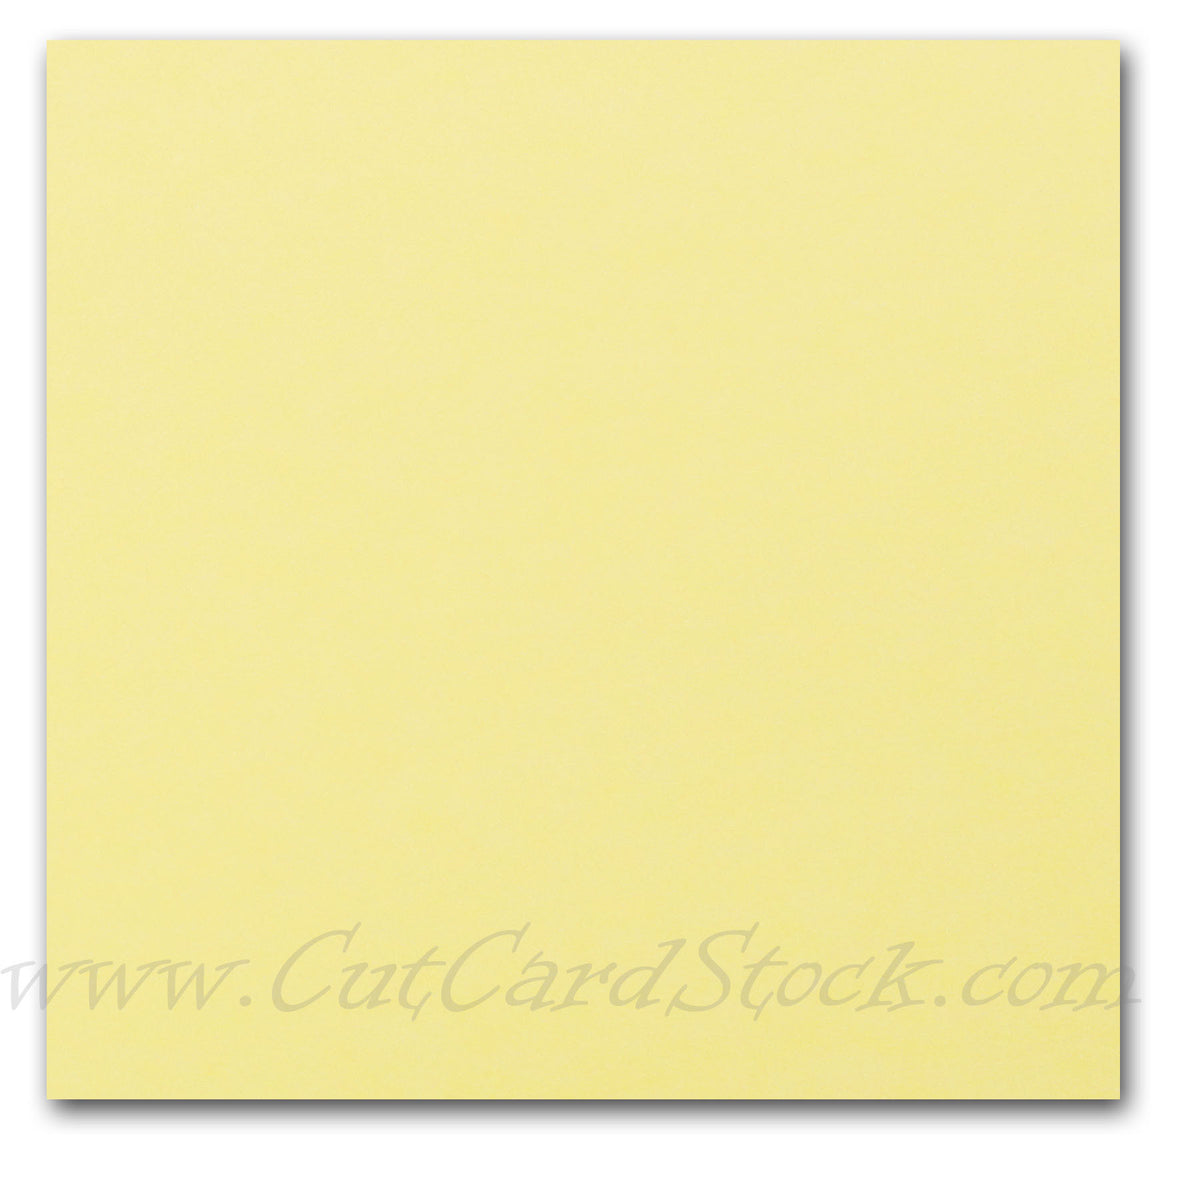 Yellow Discount Card Stock